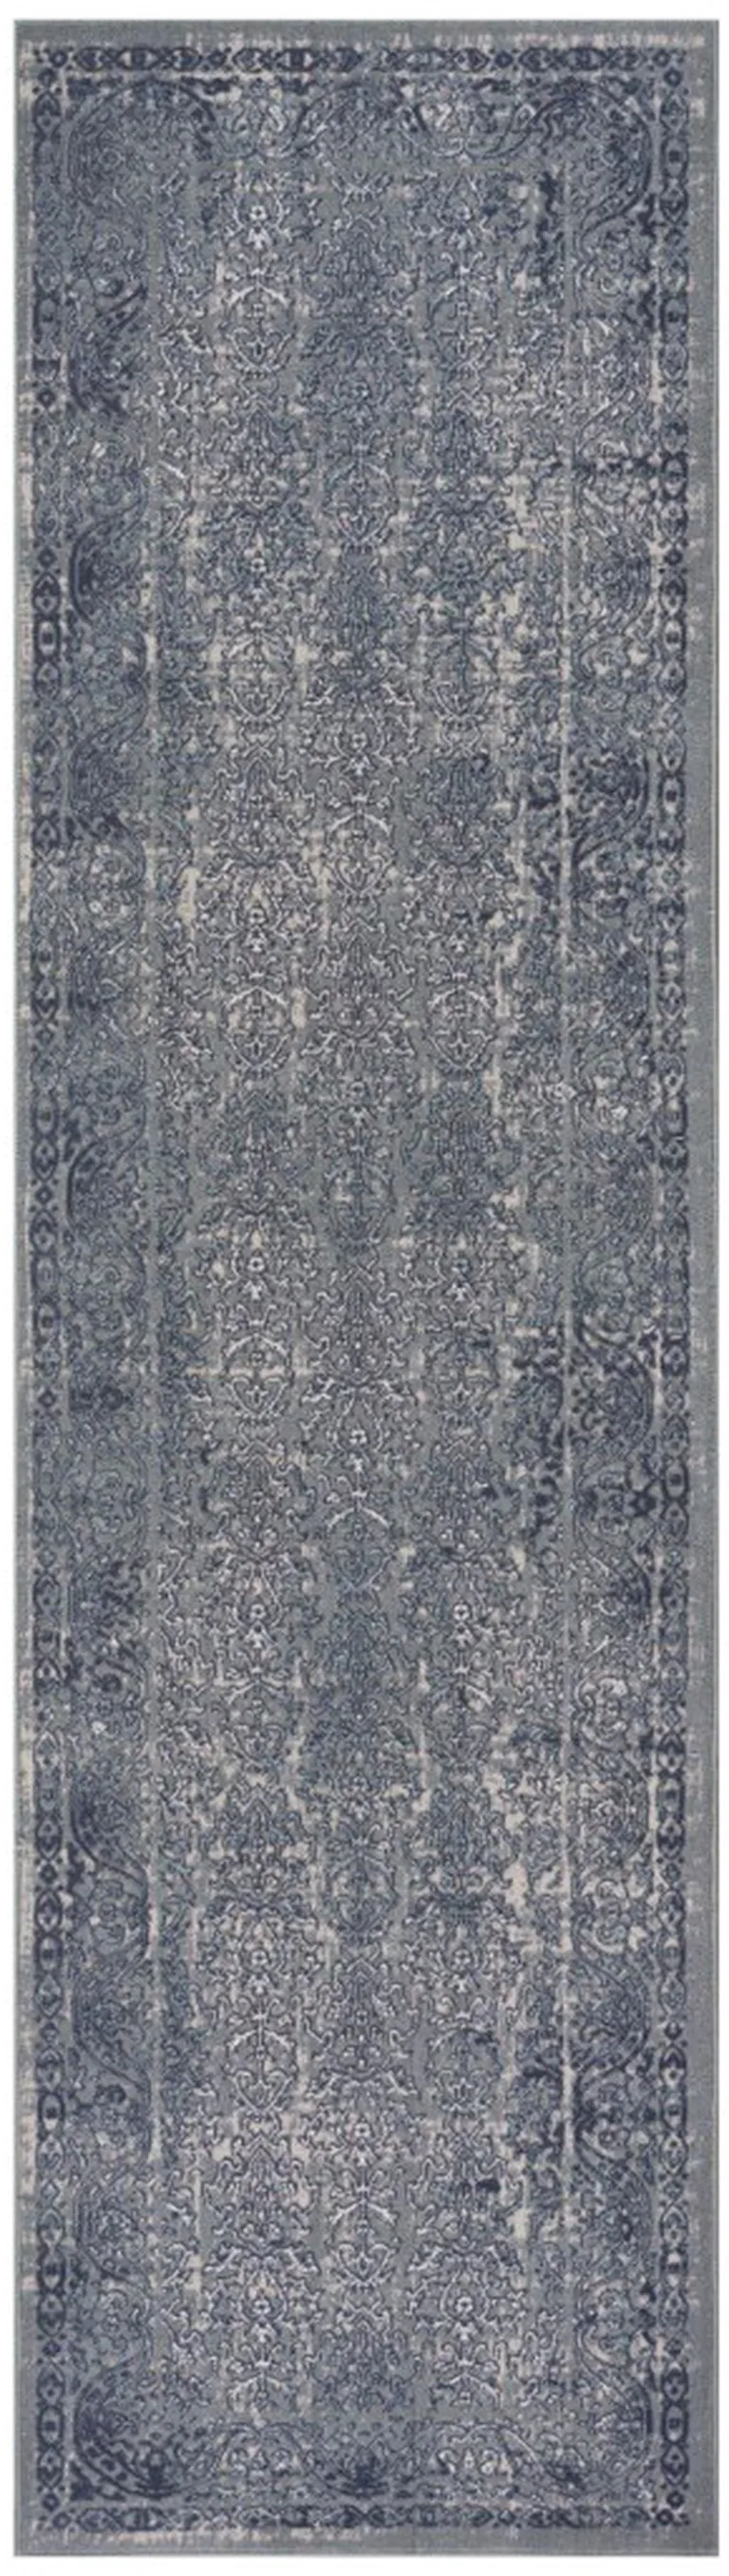 8' Blue Silver Gray And Cream Damask Distressed Runner Rug Photo 1